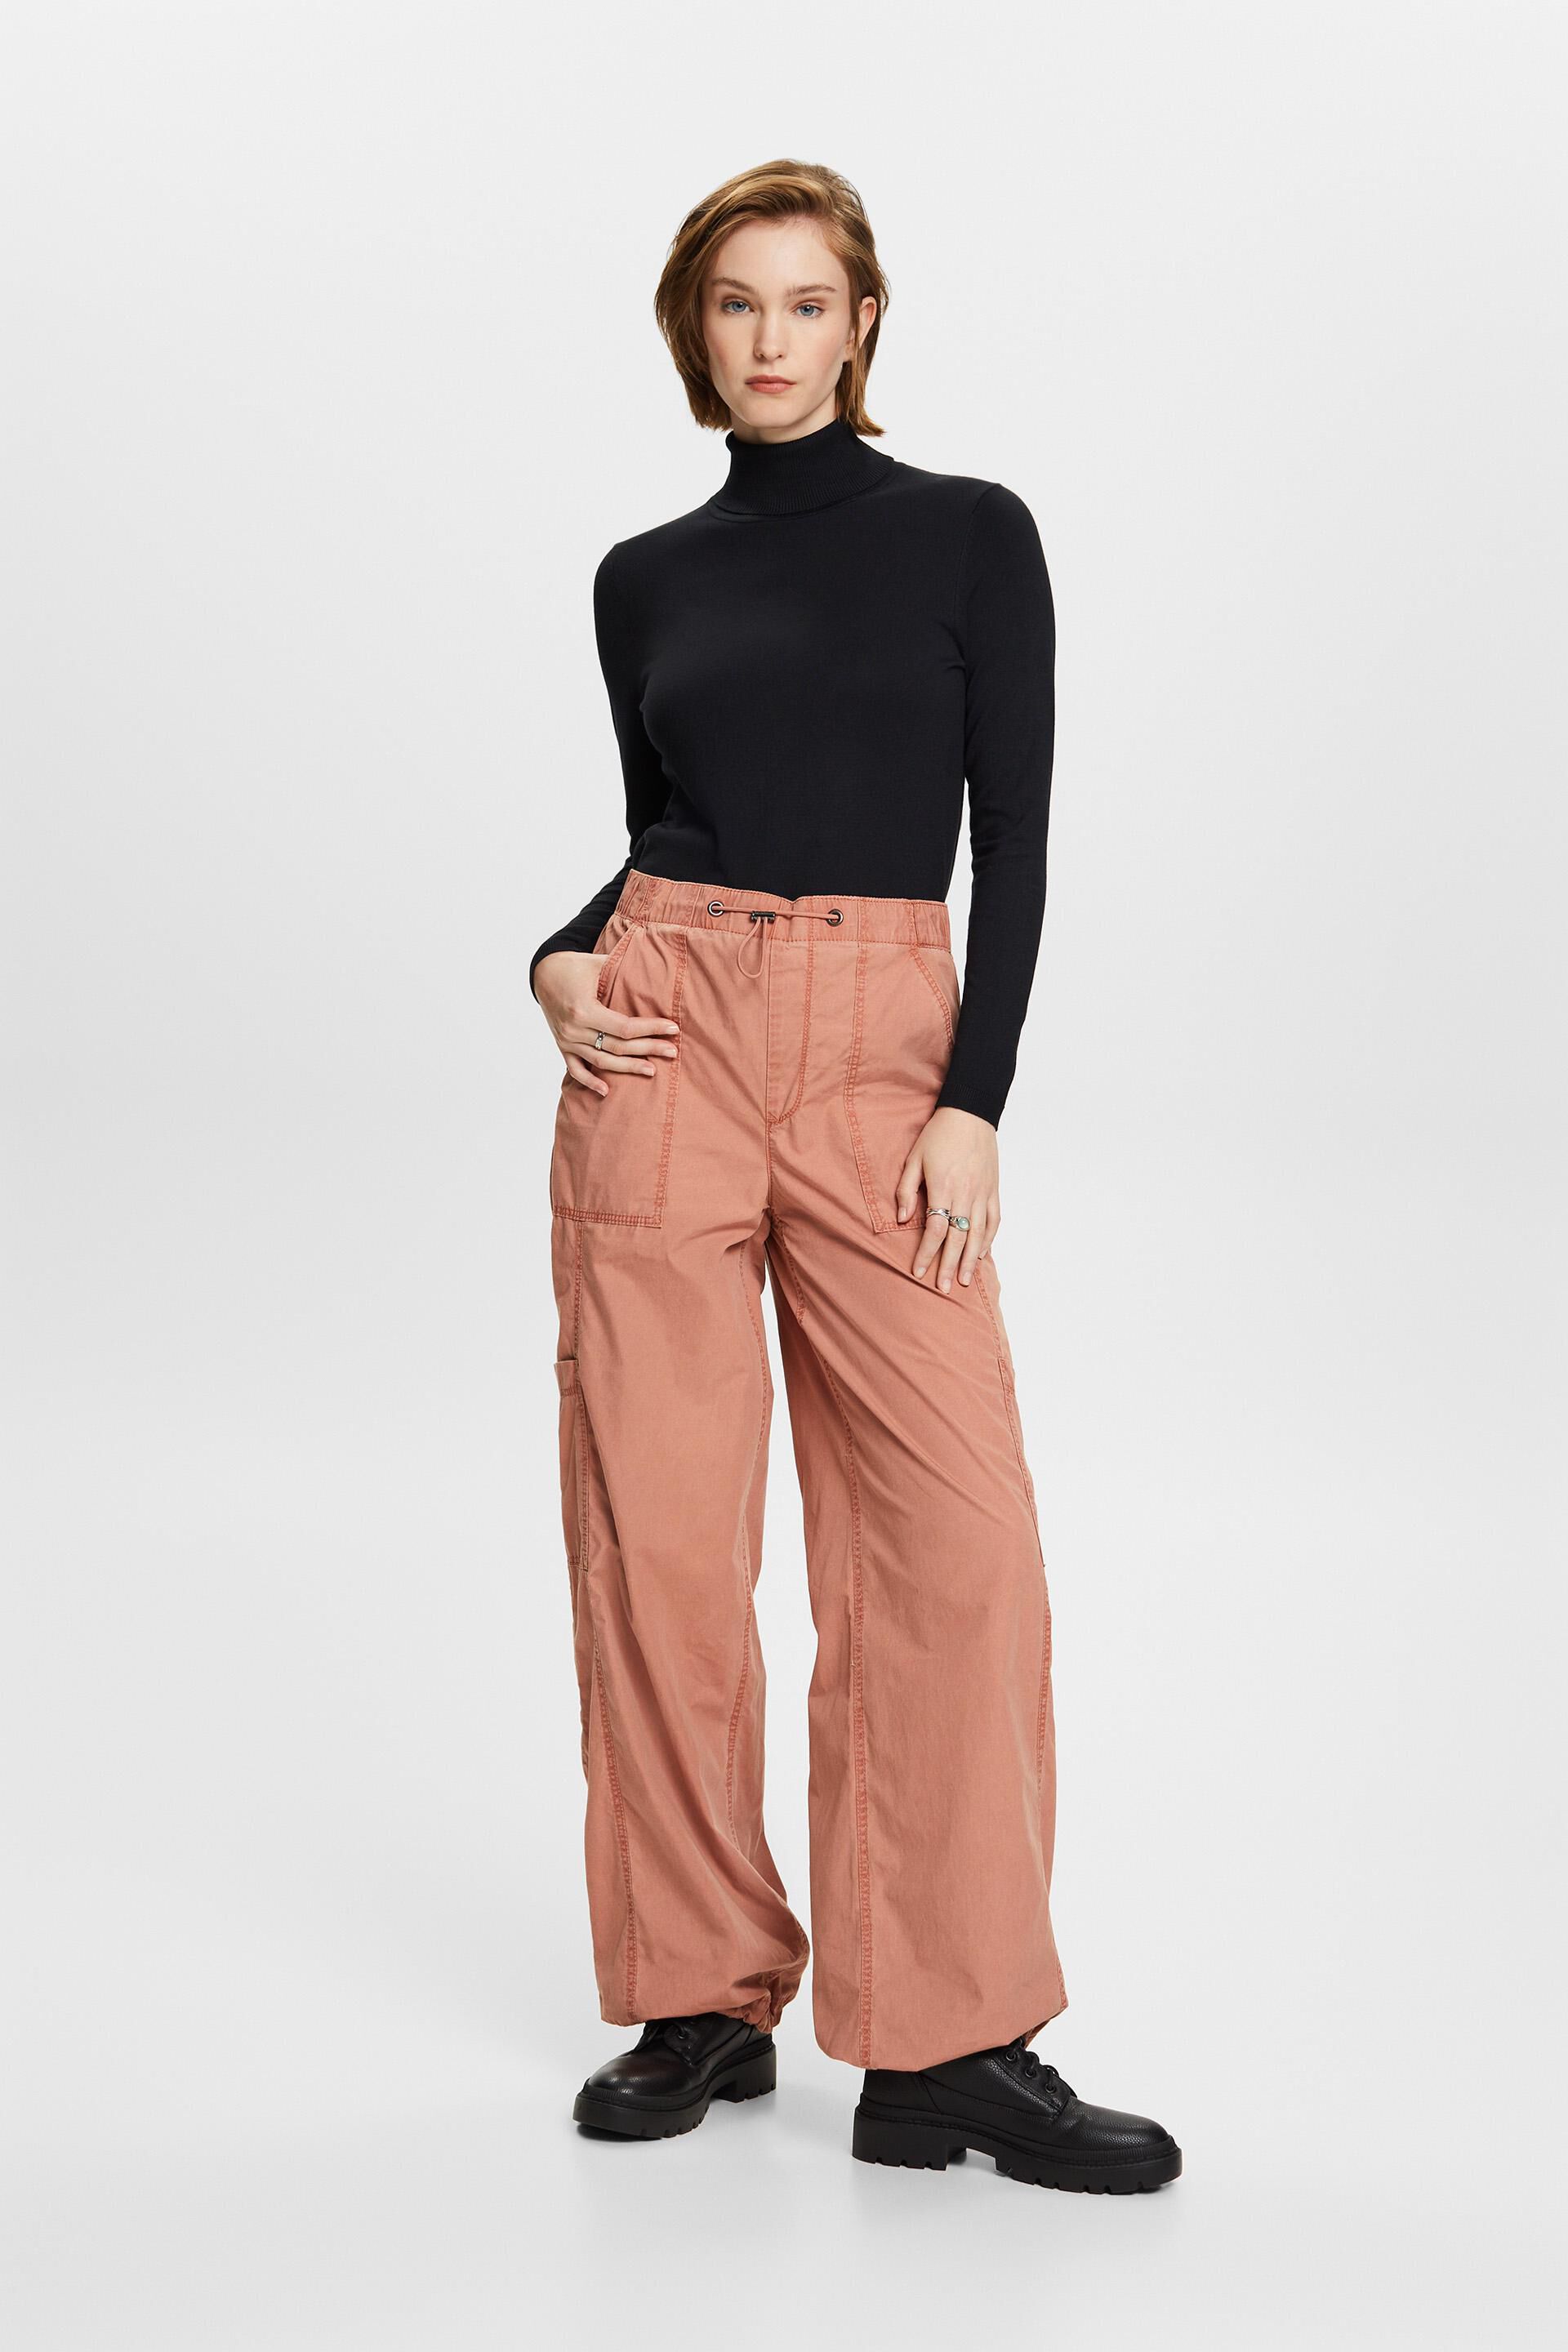 Esprit Pull-on cotton 100% trousers, cargo